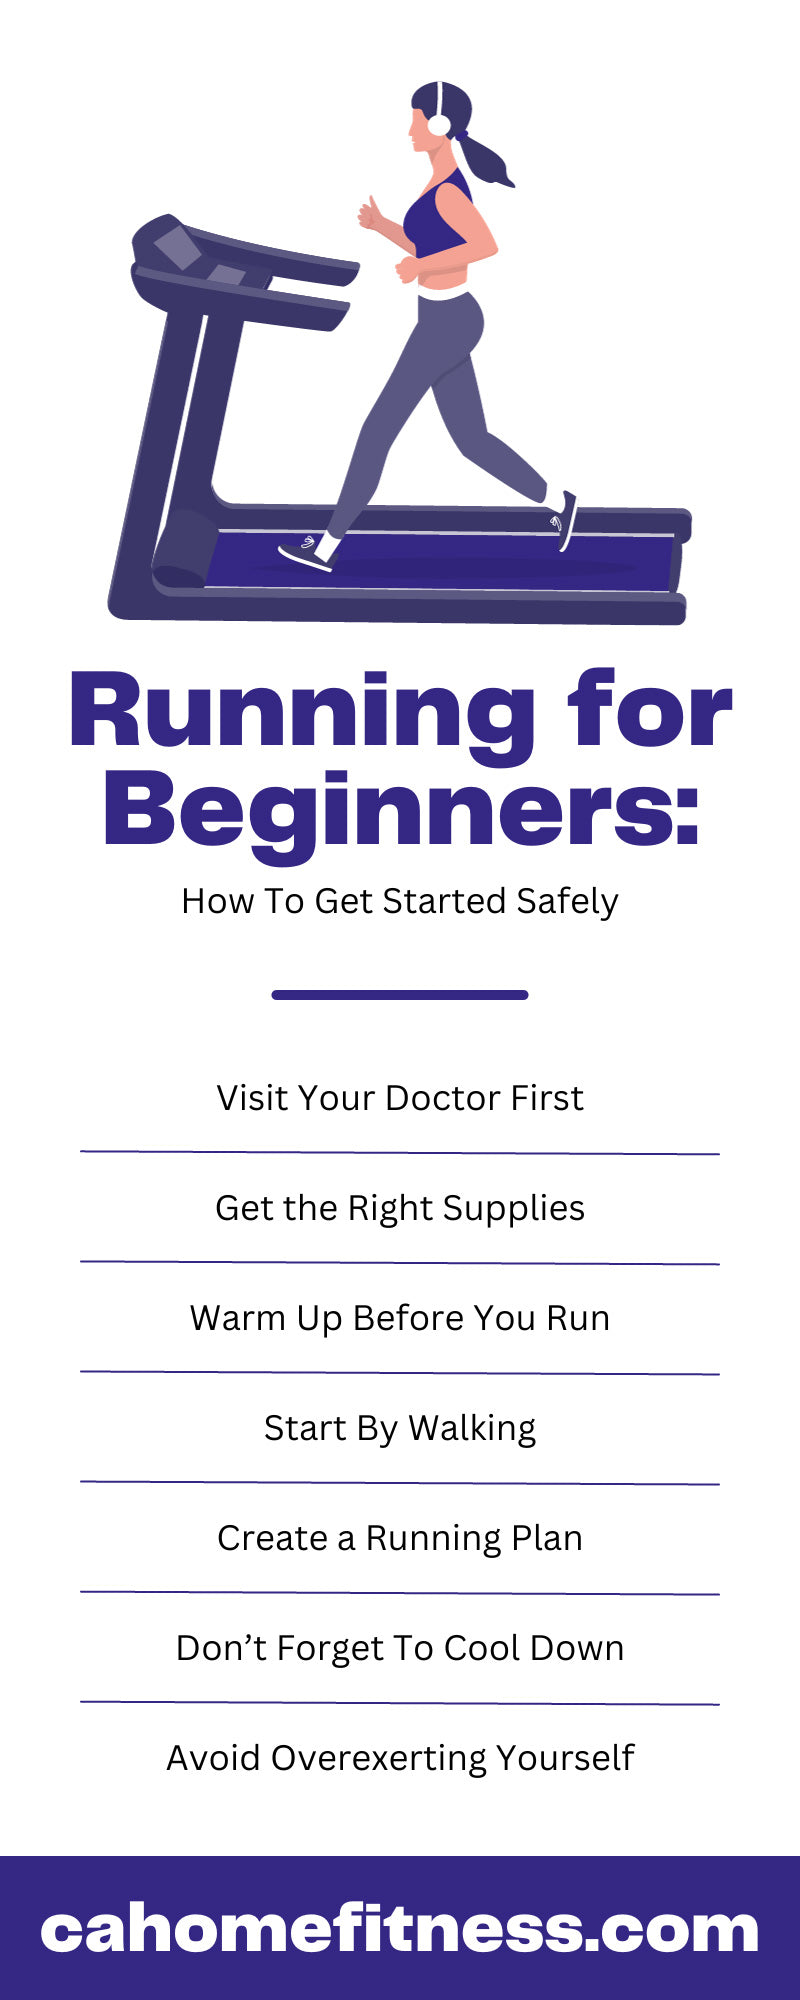 Running for Beginners: How To Get Started Safely